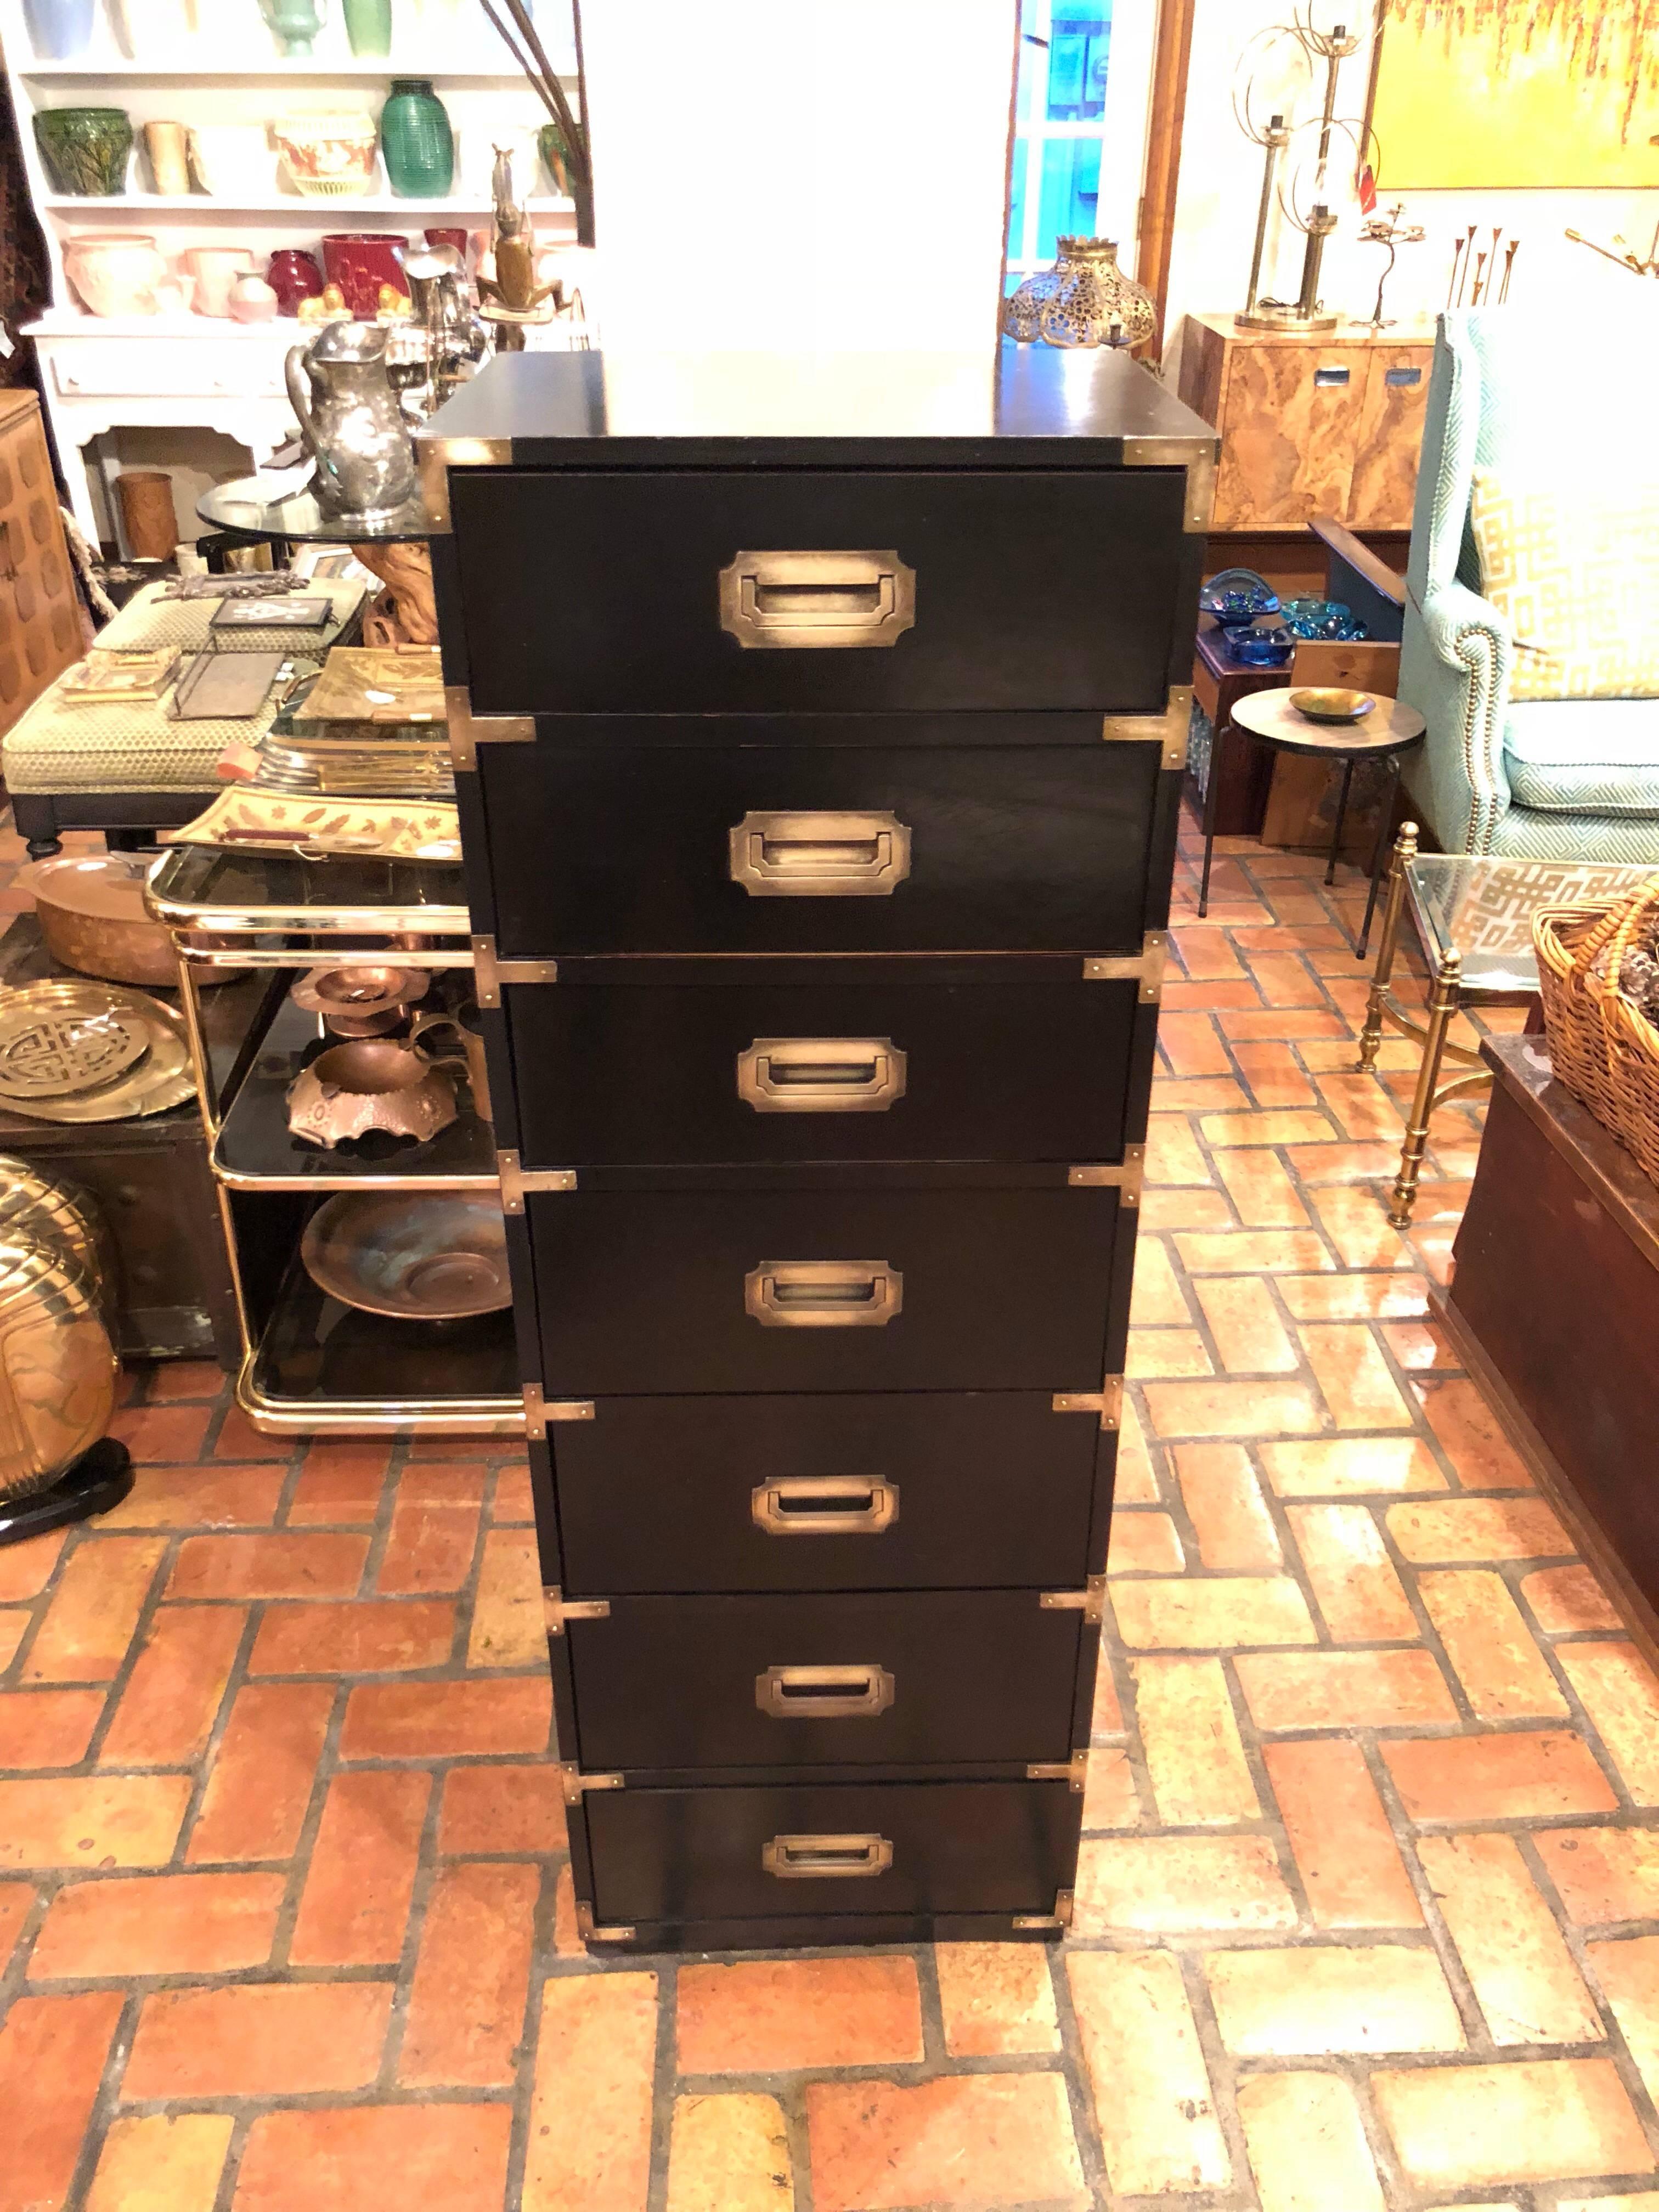 Tall Black Campaign Chest of Drawers with Brass Accents. Also could be called a semanier, as it has seven drawers. Nice upright and tall decorative pieces. Great for storage. Interior of one drawer has some wear to the inside. We may line them with